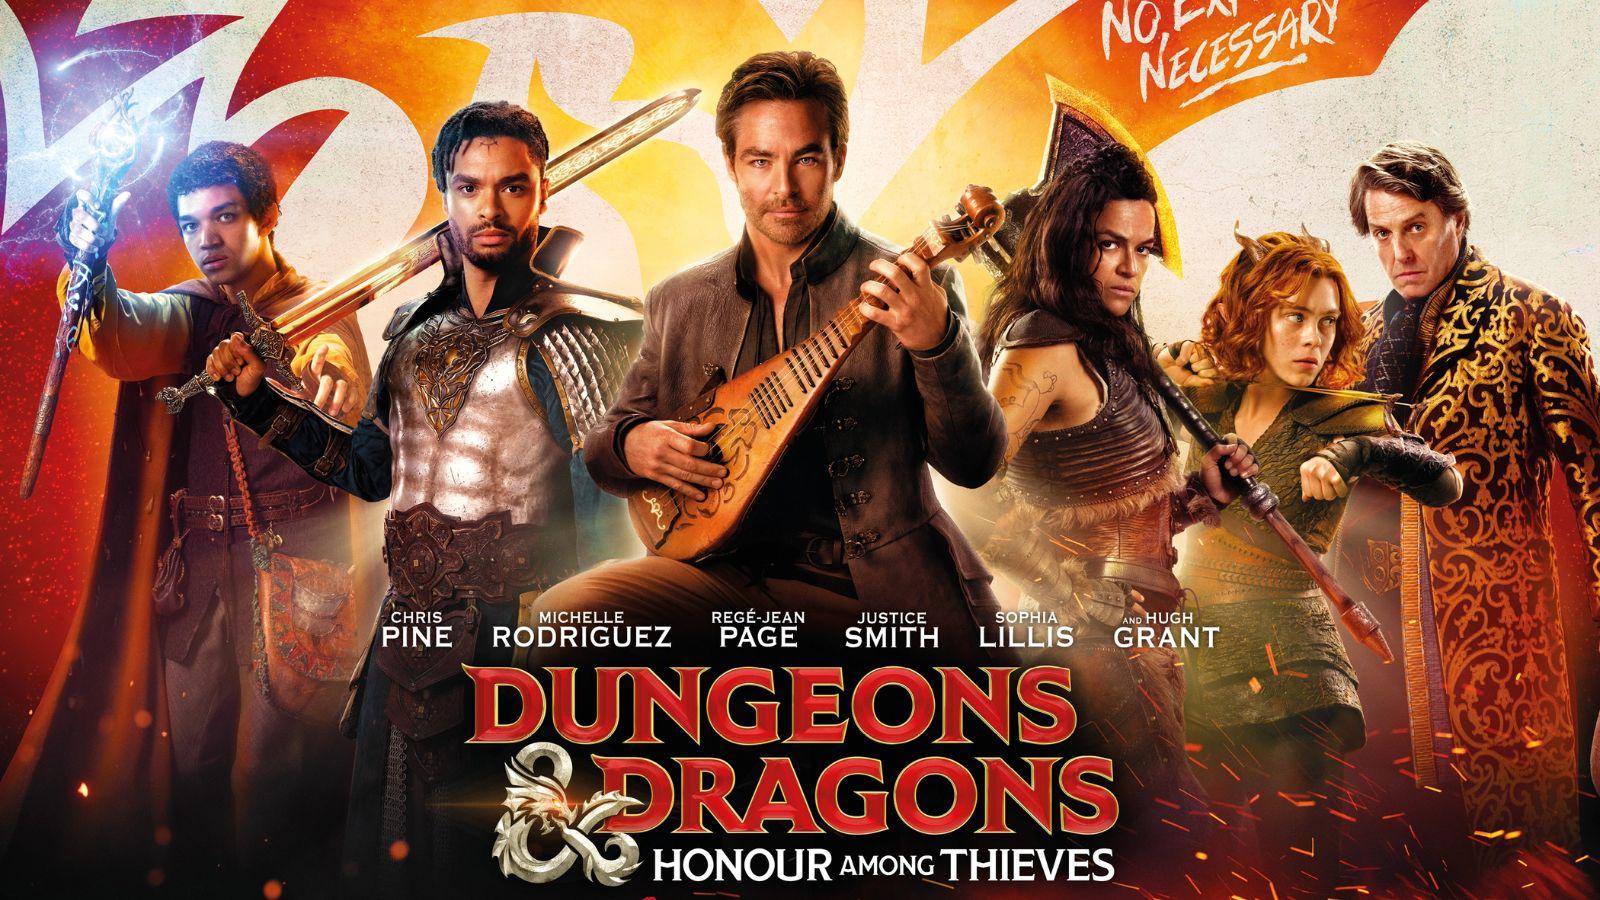 Dungeons & Dragons Honor Among Thieves